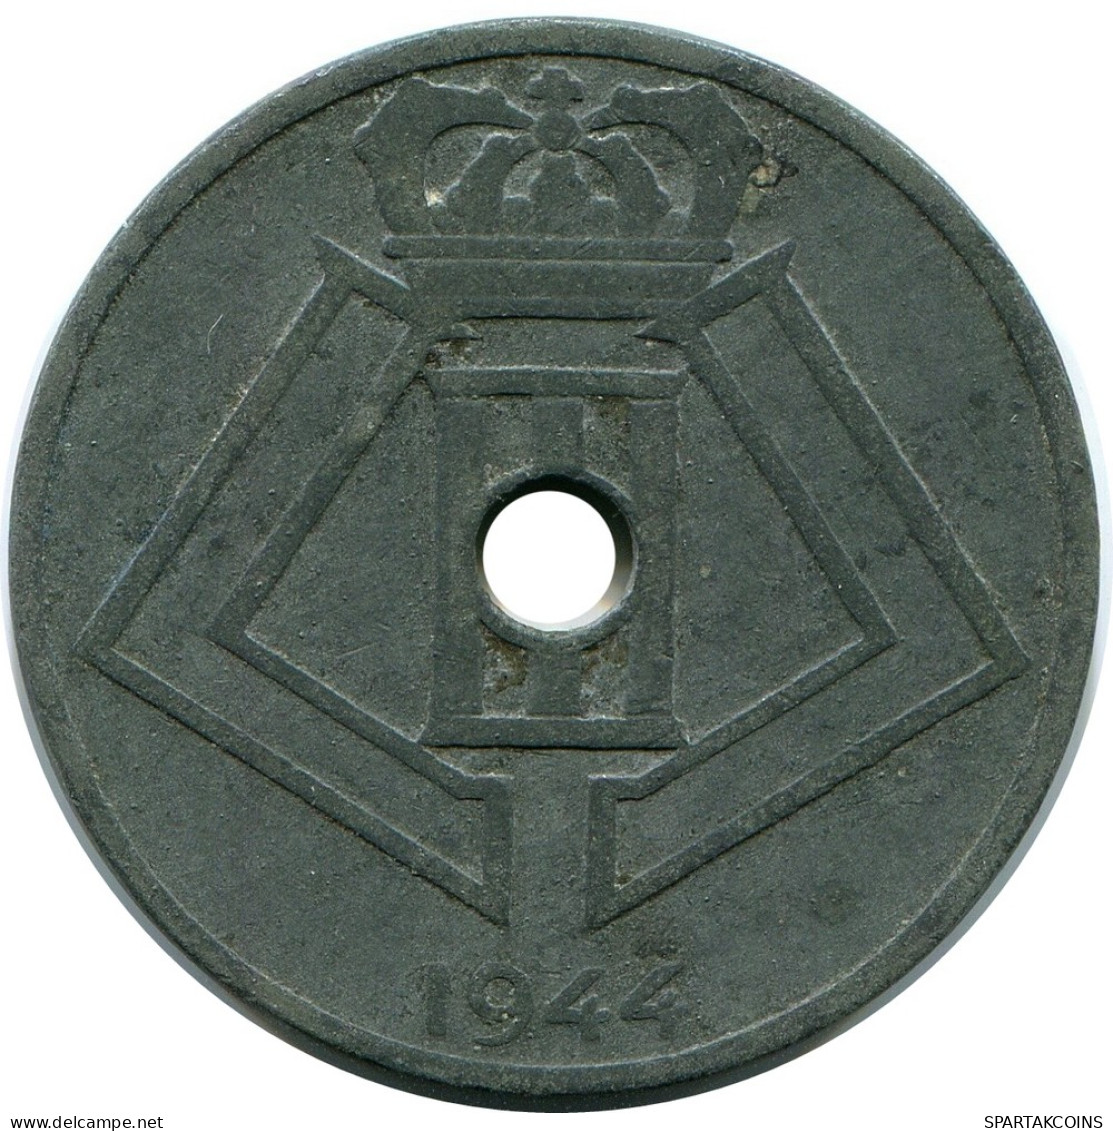 25 CENTIMES 1944 FRENCH Text BELGIUM Coin #BA422.U - 25 Cents